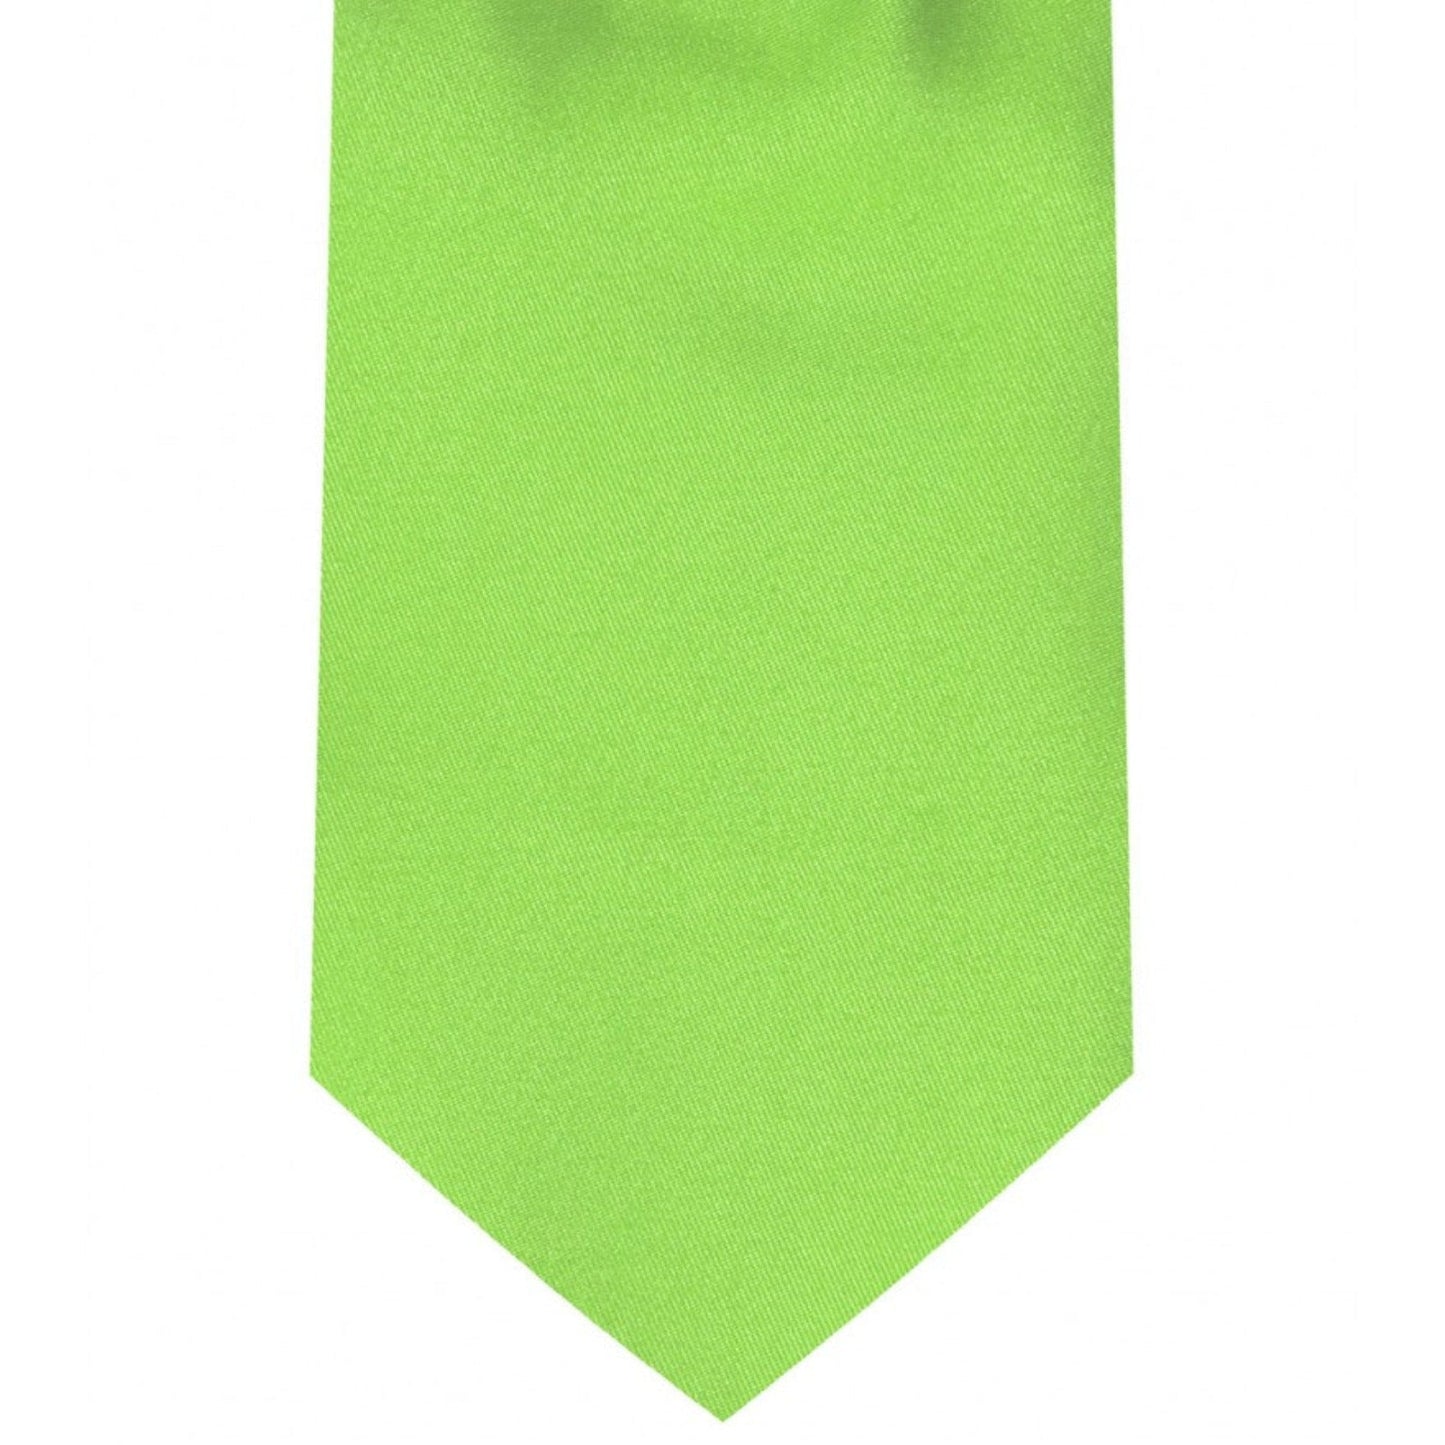 Classic Lime Tie Regular width 3.5 inches With Matching Pocket Square | KCT Menswear 